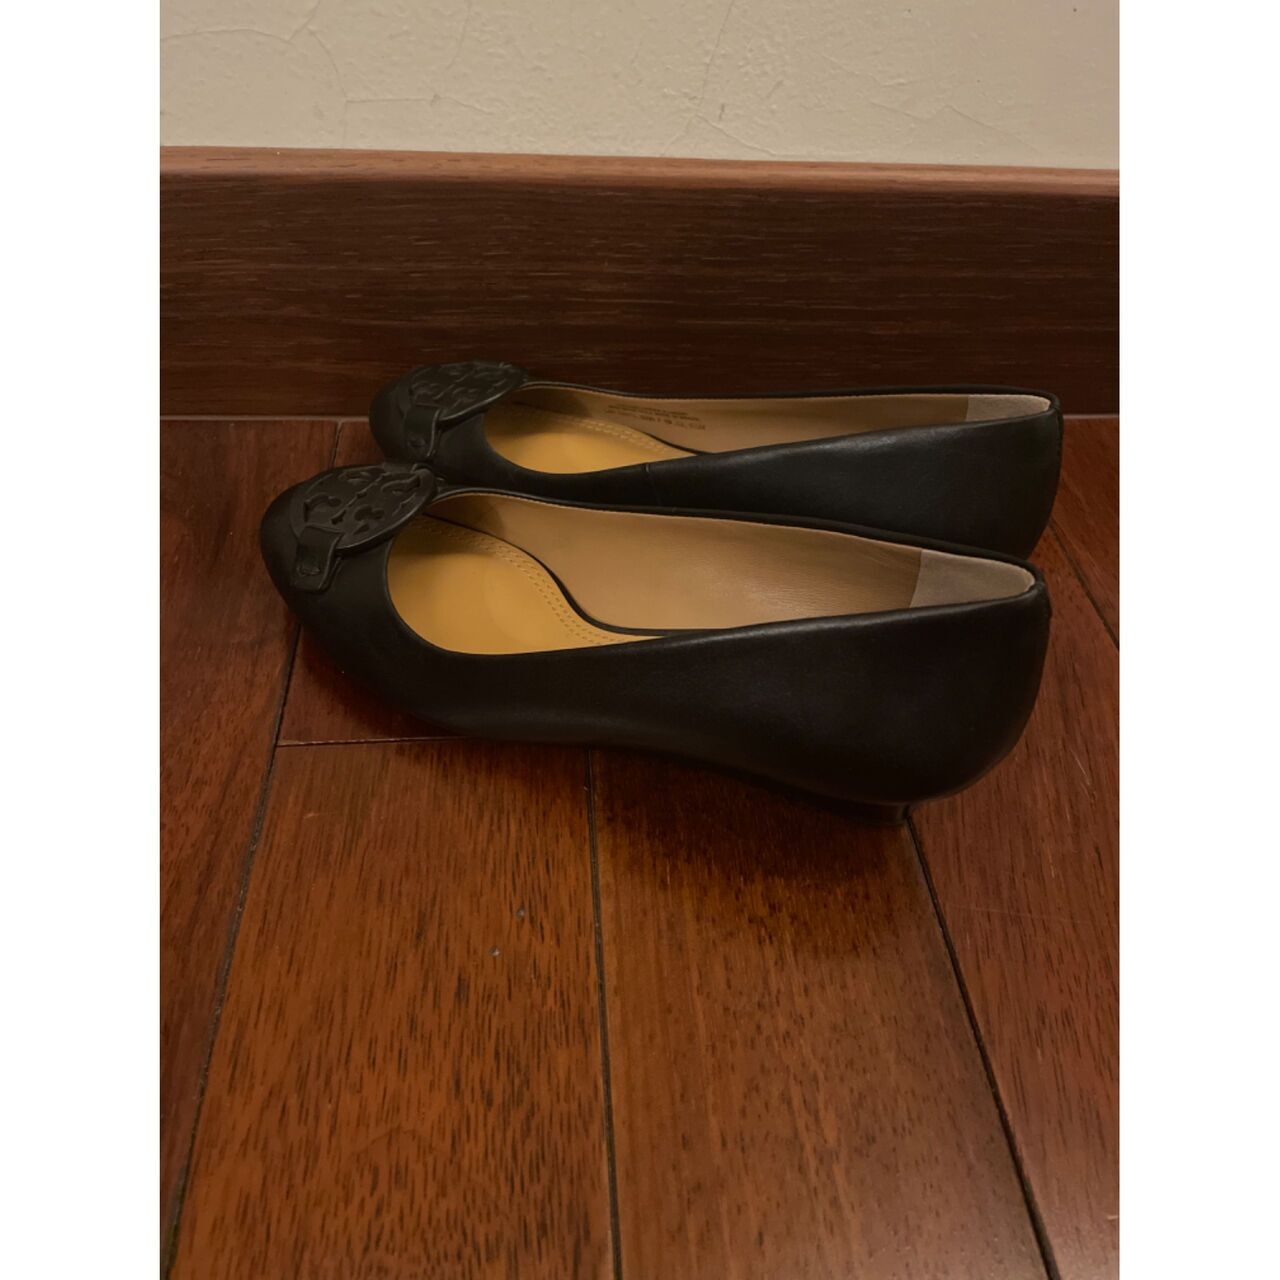 Tory Burch Miller Black Leather Wedges